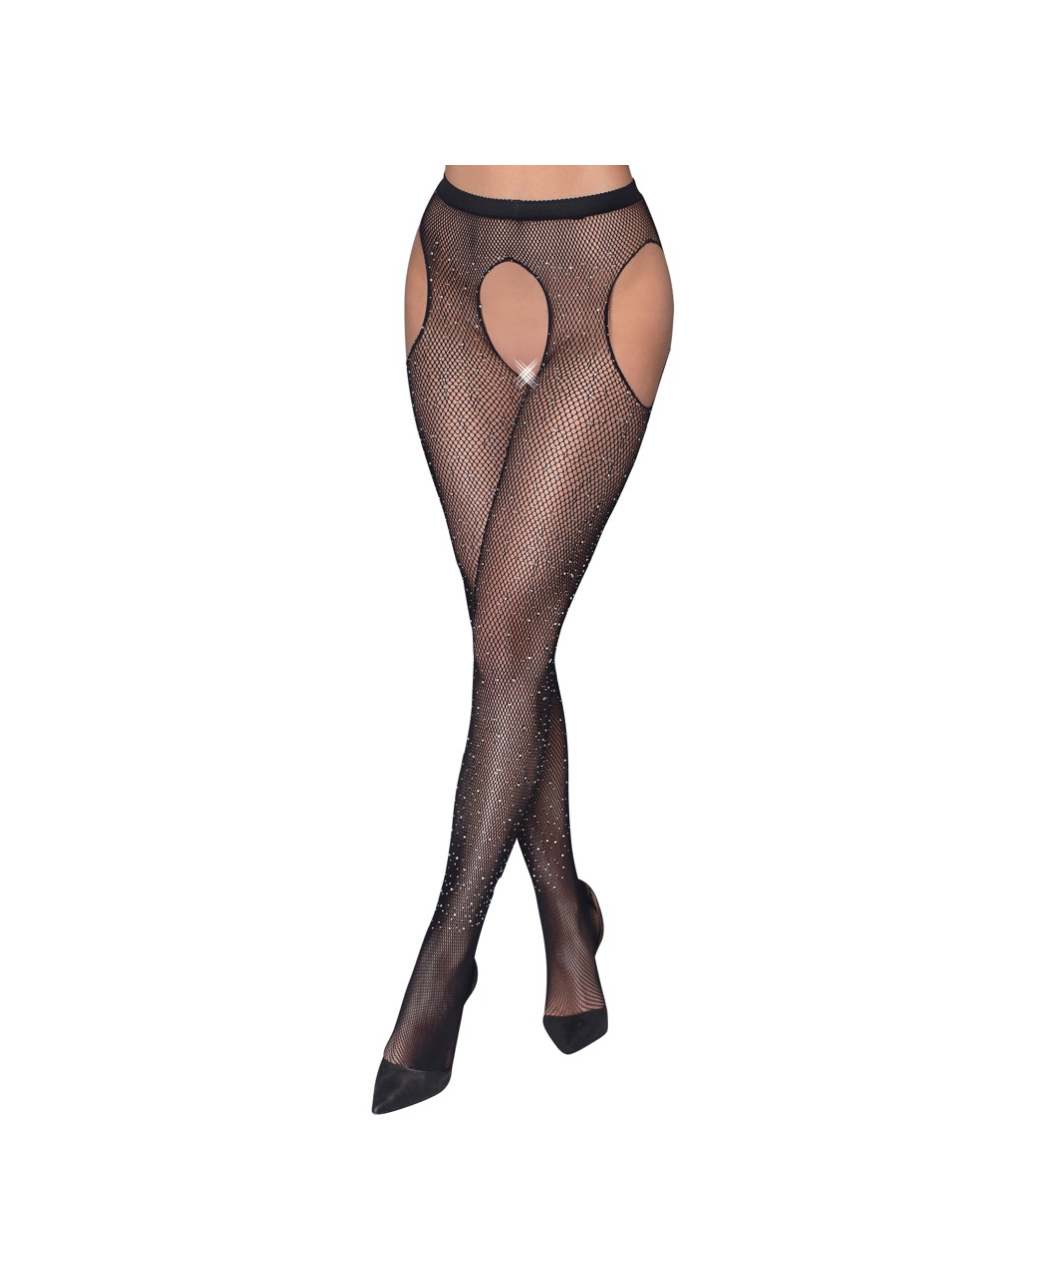 Cottelli Lingerie black net tights with cutouts and rhinestones